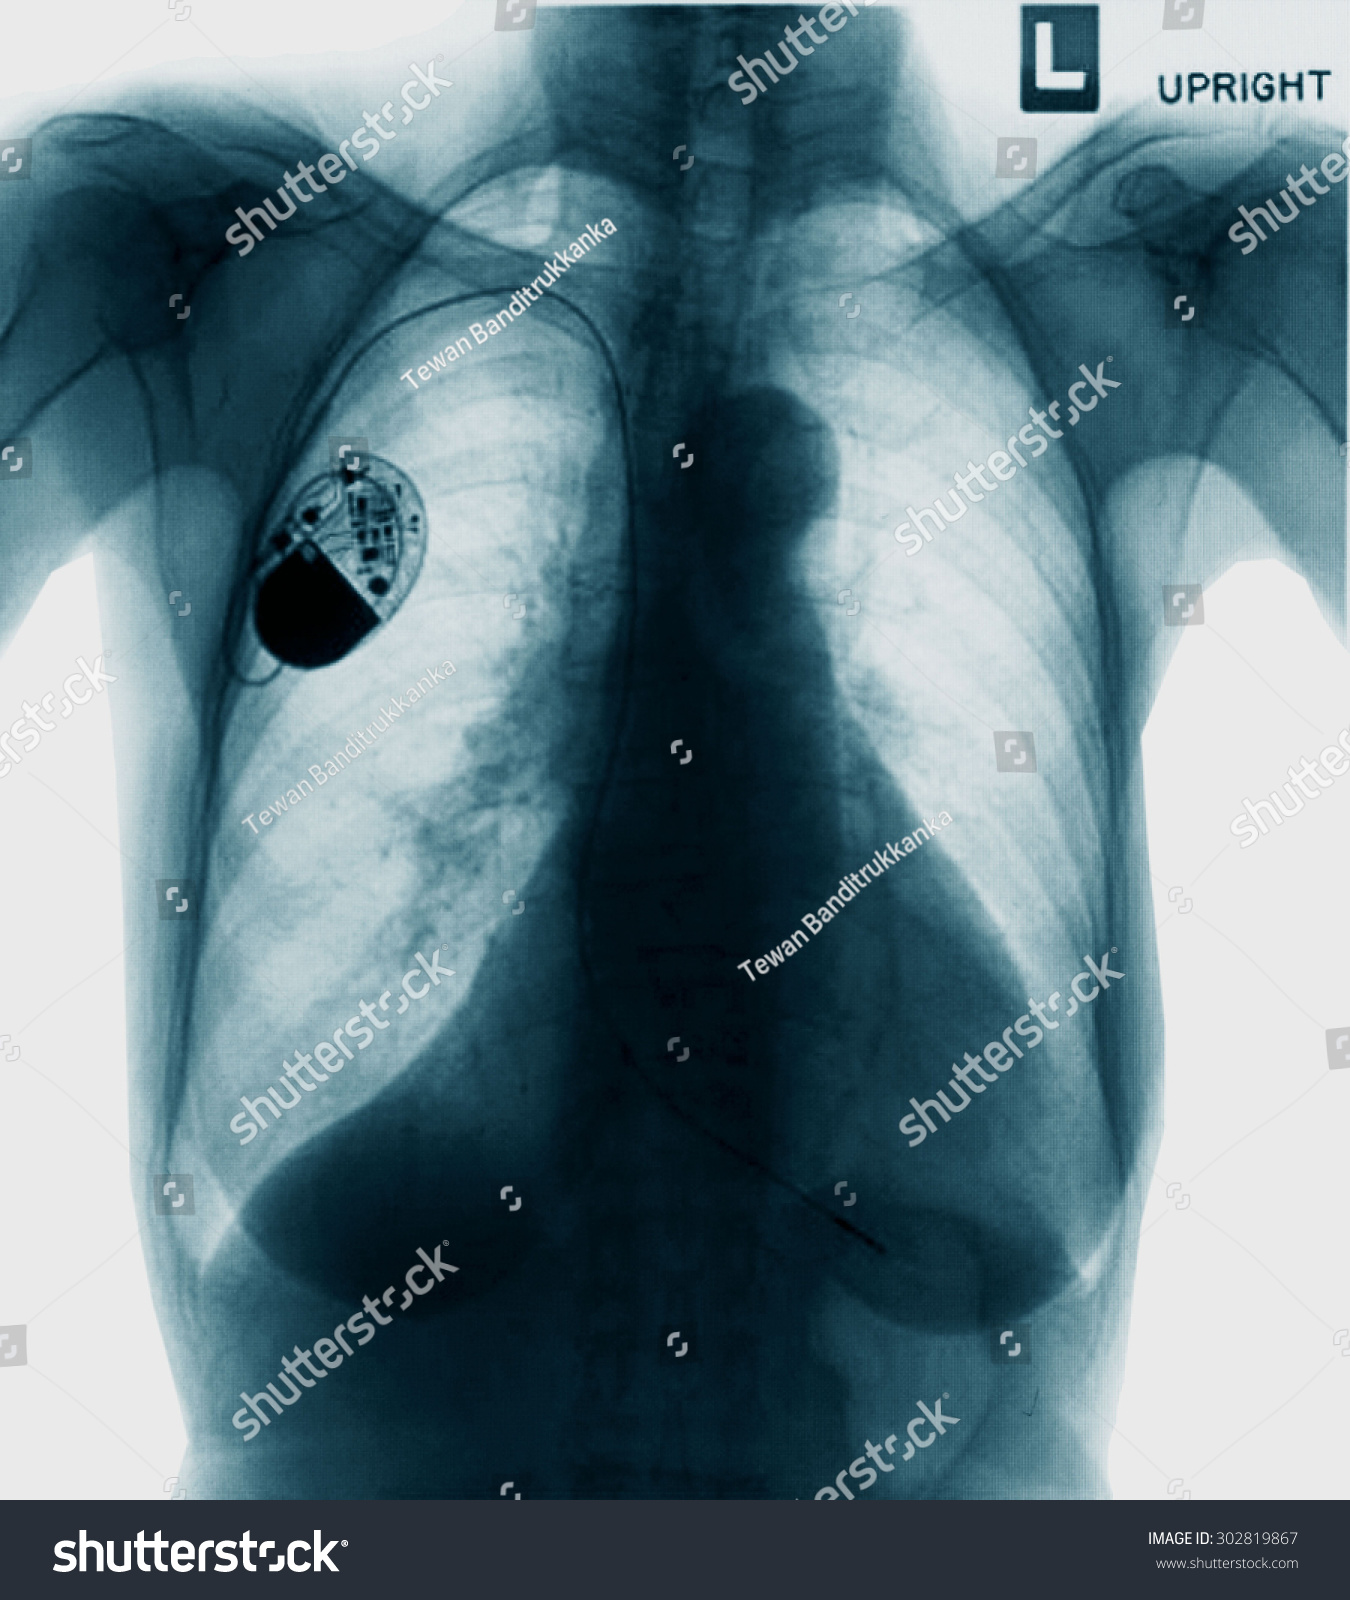 Chest With The Pacemaker On X-Ray Film Stock Photo 302819867 : Shutterstock